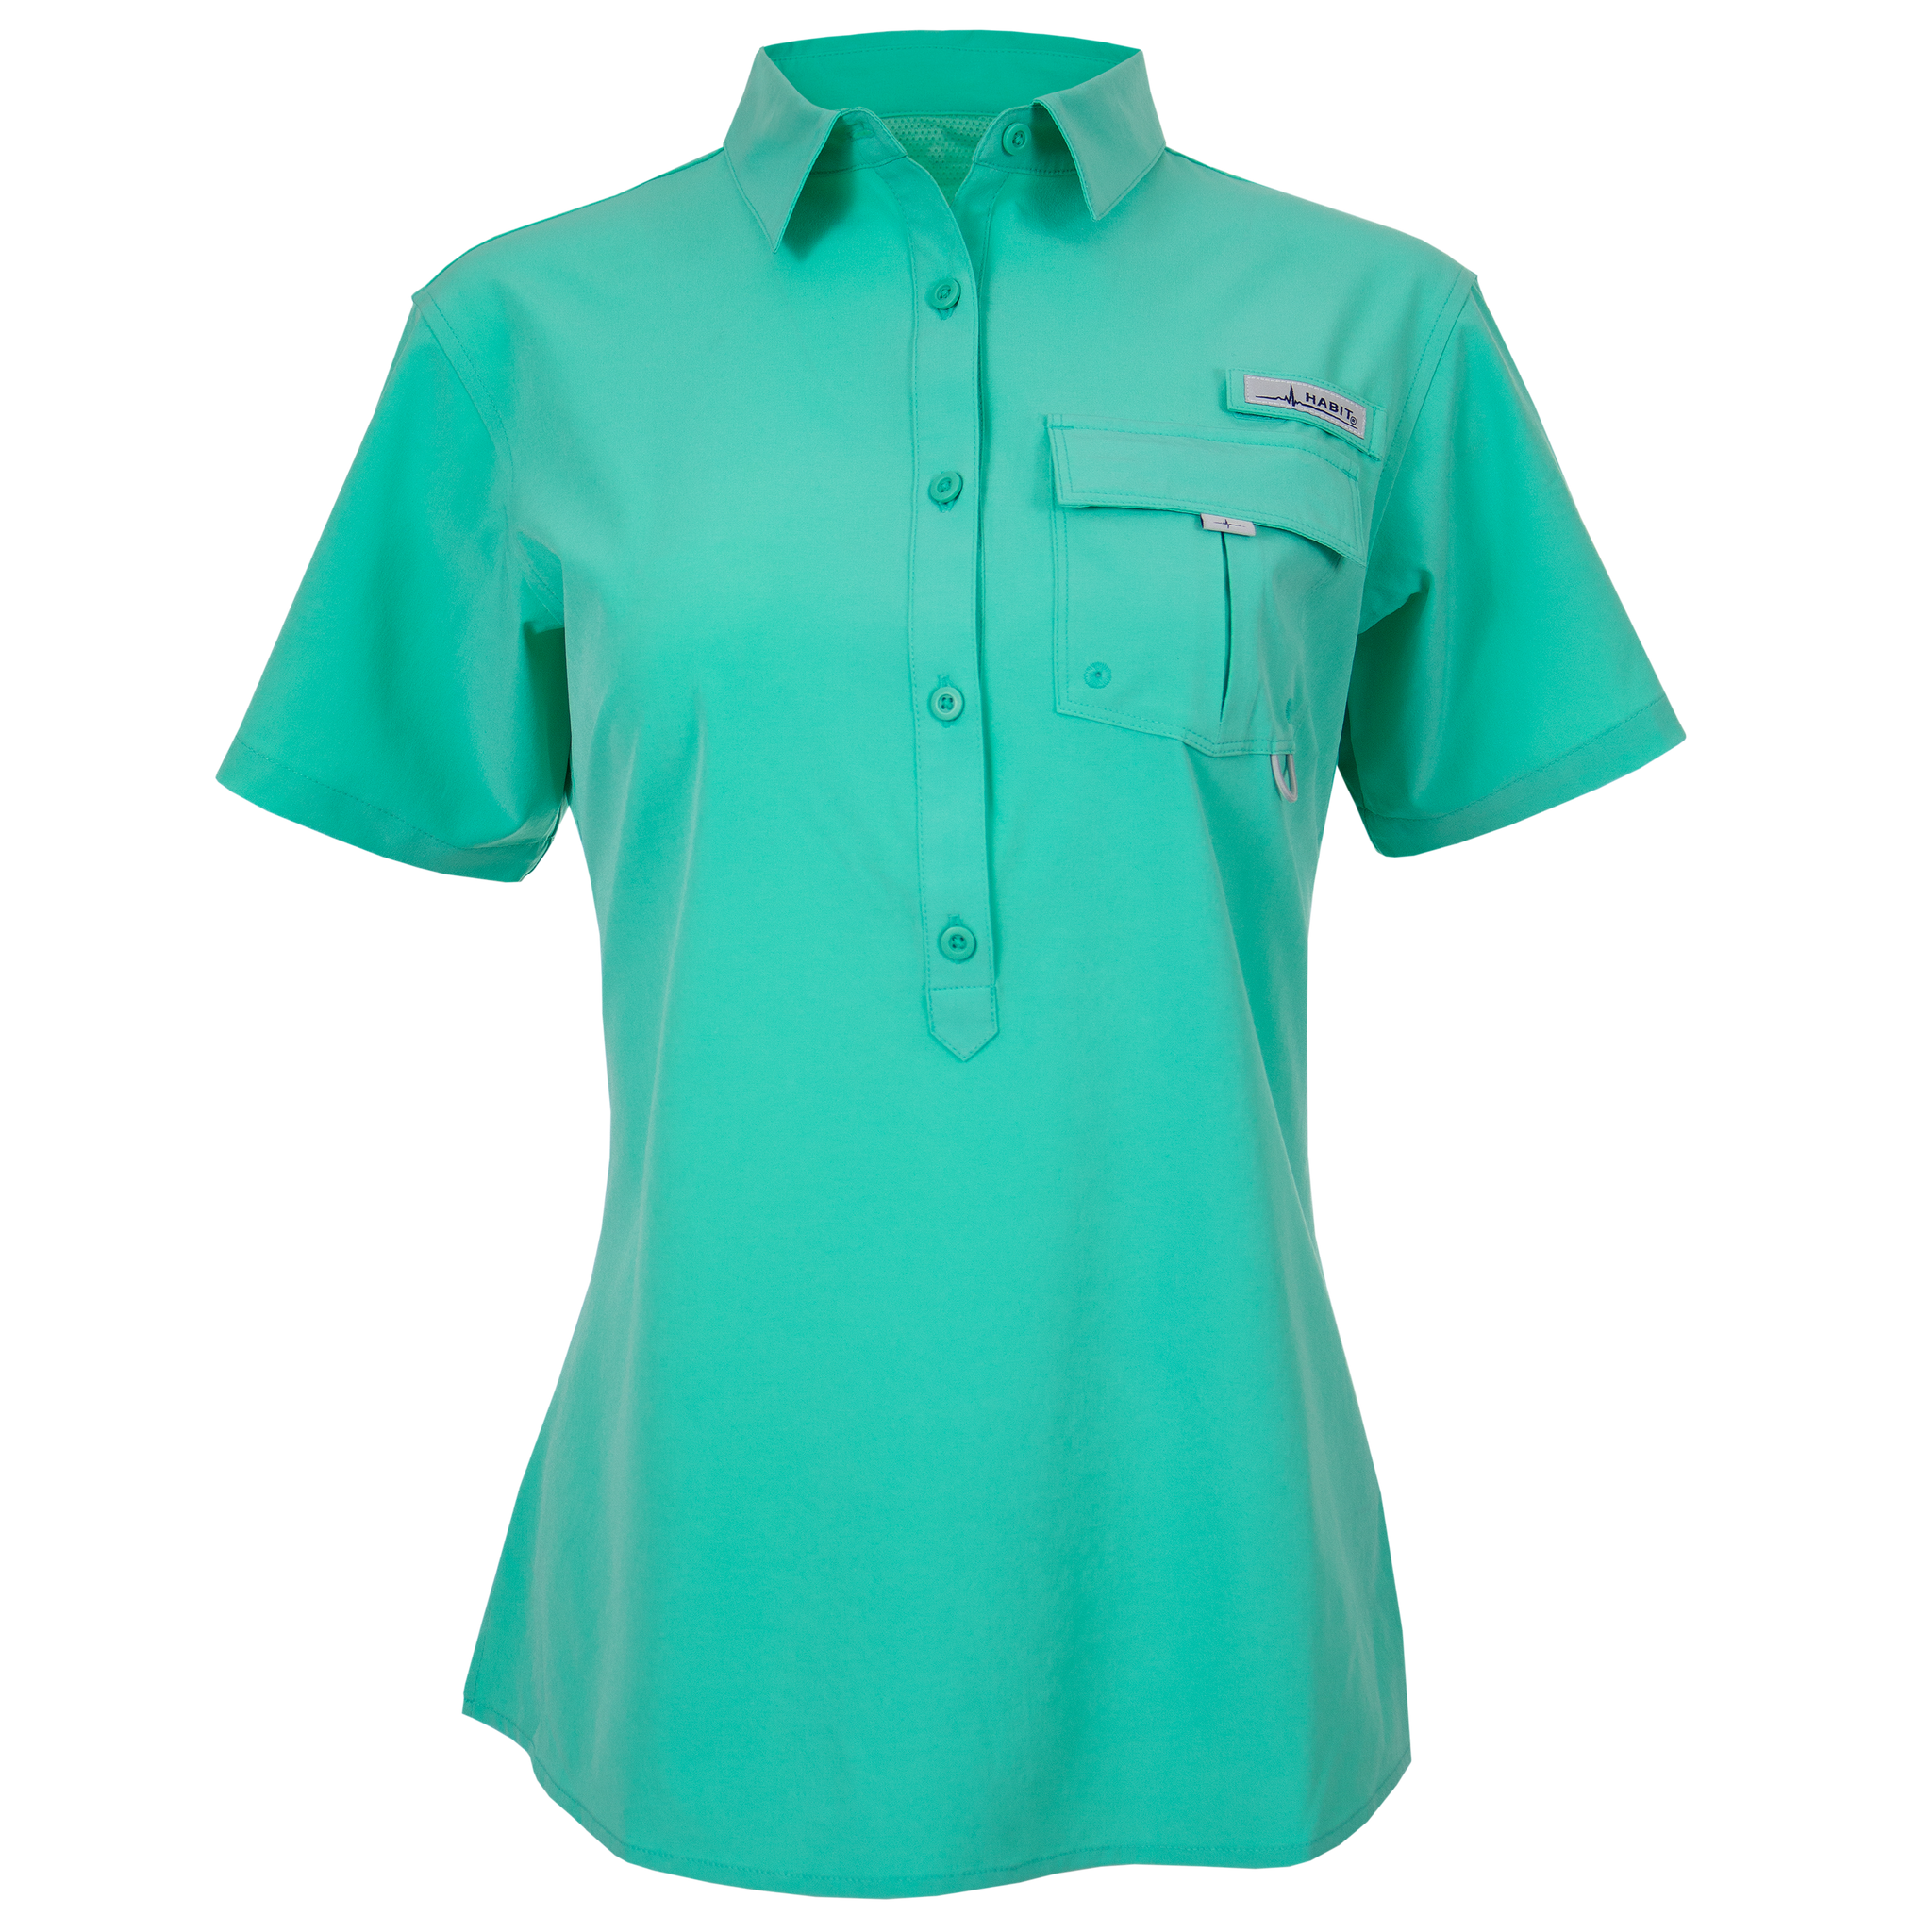 Habit Trapper Junction River Short Sleeve Shirt - Womens Calypso Coral Large TS10034-2B7-WL